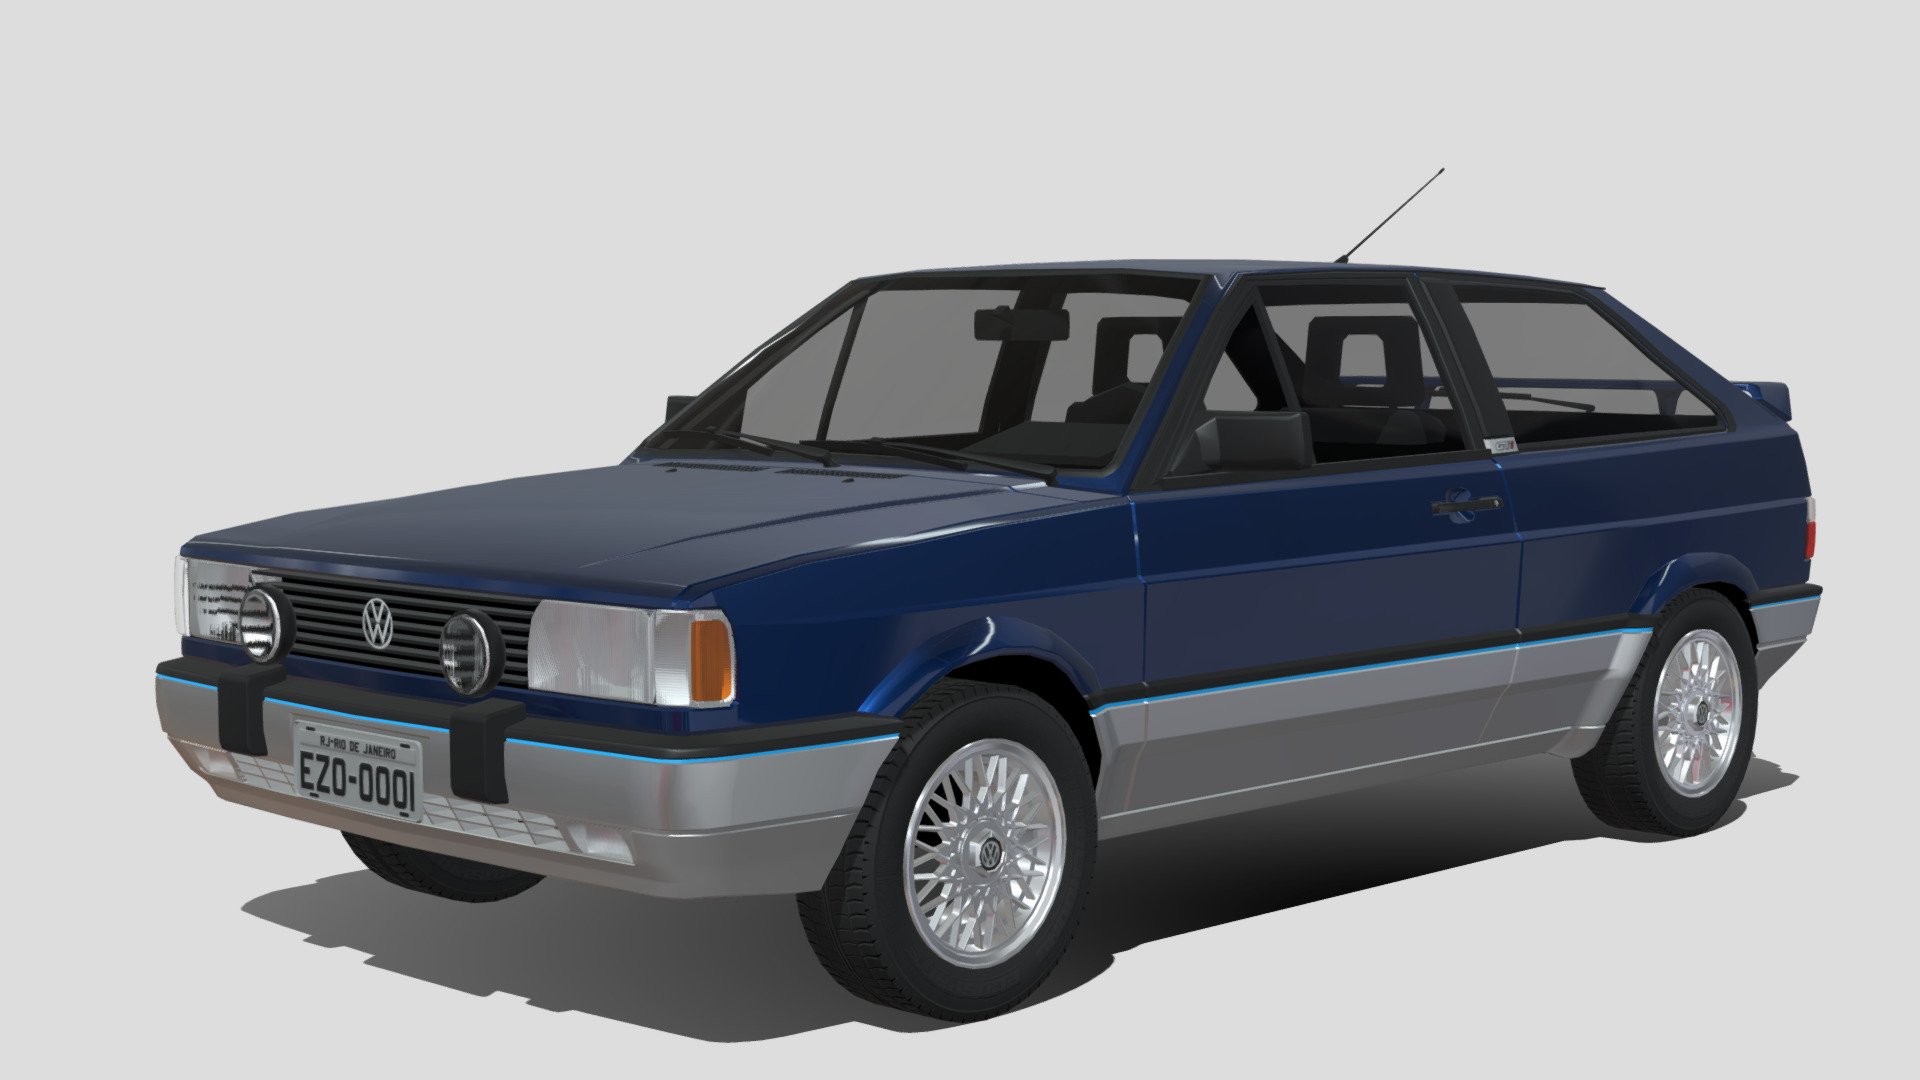 1993 VW Gol GTi, the first BR-made fuel injected car. Featuring a Bosch LE-Jetronic multipoint mechanical fuel injection, it developed 120hp on a 2.0 litre AP2000 inline 4, on standard gasoline. Despite Ethanol being a &lsquo;free-hp' fuel for hot hatches in the 80's and 90's, the delicate fuel injection system couldn't withstand the corrosion effects ethanol has. Due to that, the &lsquo;inferior' Gol GTS that featured a 1.8 litre AP1800S developed 105 hp and boasted similar performance to the GTi for less than 50% of the price, albeit, less luxurious, advanced and exclusive. Due to the &lsquo;fancy' fuel injection system, a deal with the government was made to allow the production of the GTi but the production was limited to 2000 units a year despite demand. The GTi despite being a dream car, wasn't free of the &lsquo;old BR quality' issues other BR-made/delivered cars suffered at the time, needing a &lsquo;secret' (underwarranty) engine rebuild done at a dealer before 50k km on the long term test unit used by Quatro-rodas 3d model